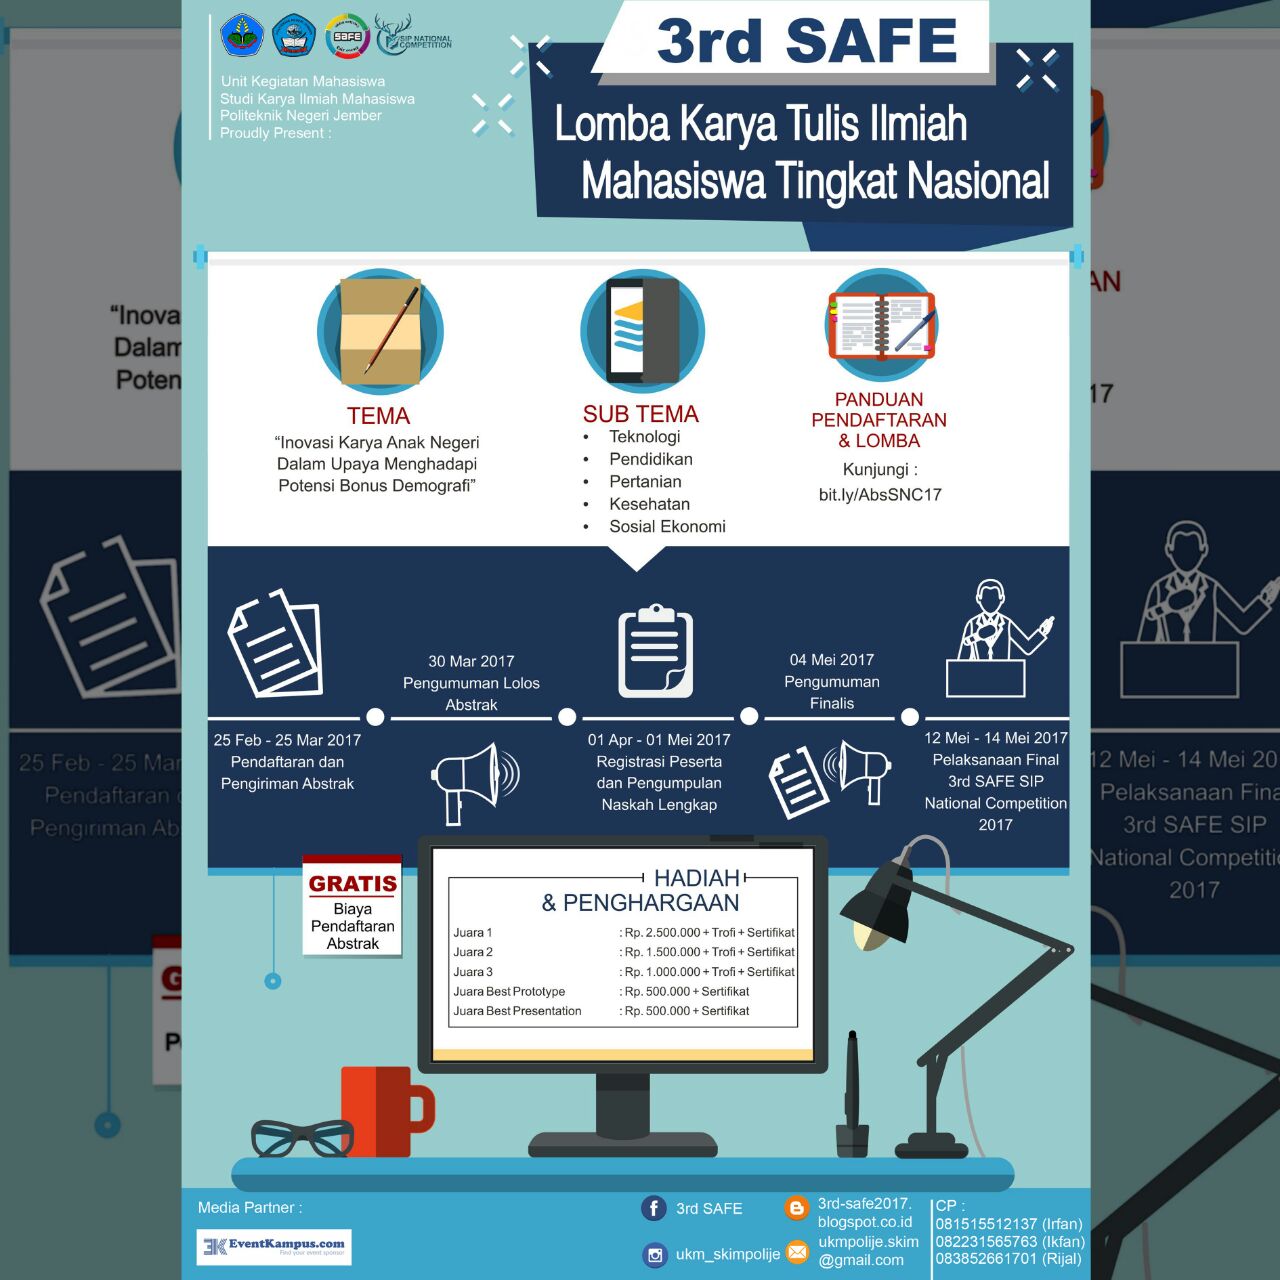 Poster 3rd SAFE SIP National Competition 2017